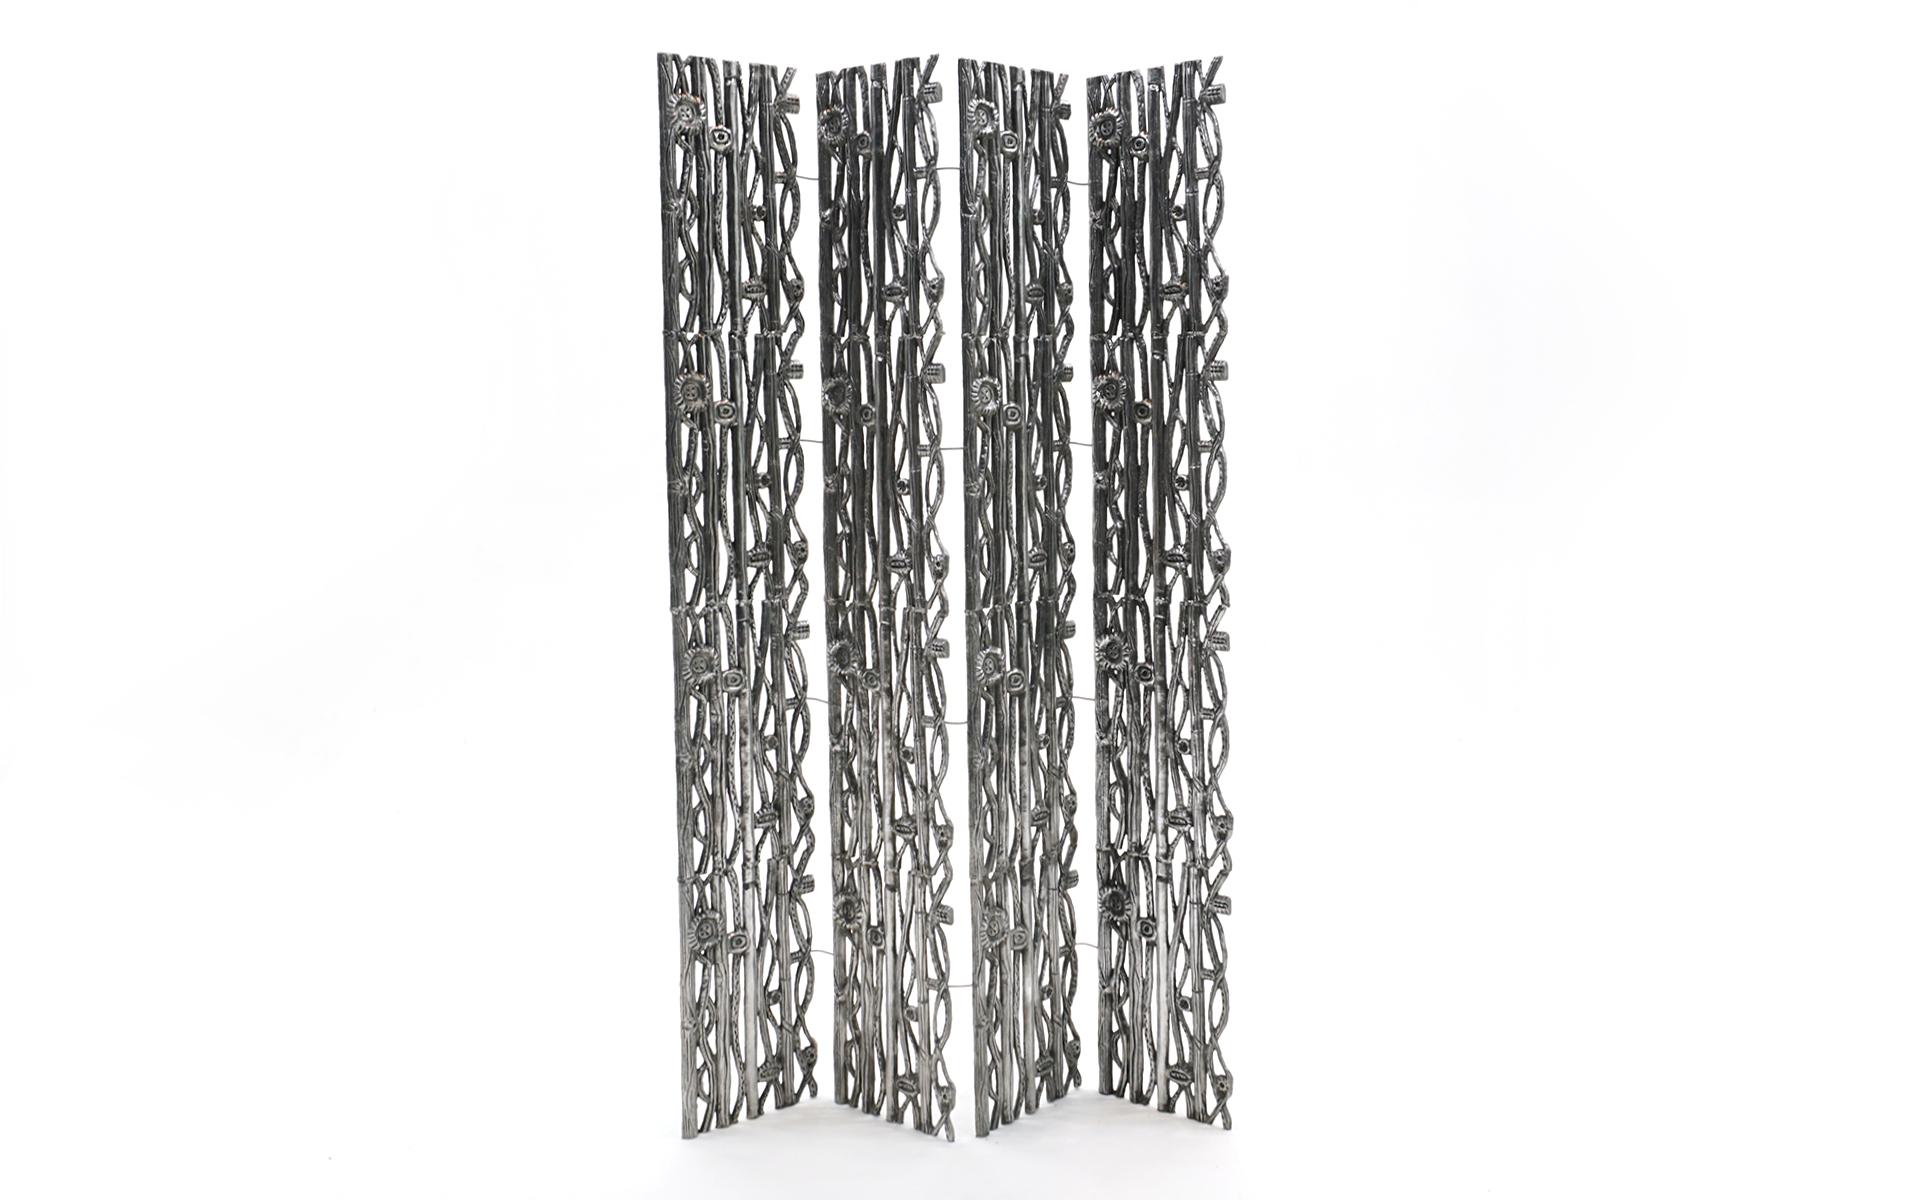 Donald Drumm Cast Aluminum Screens.  Ten panels total making for a stunning room divider.  One screen is six panels and the other is four panels.  Excellent original condition with all the connectors in place.  These stand easily and are sturdy and